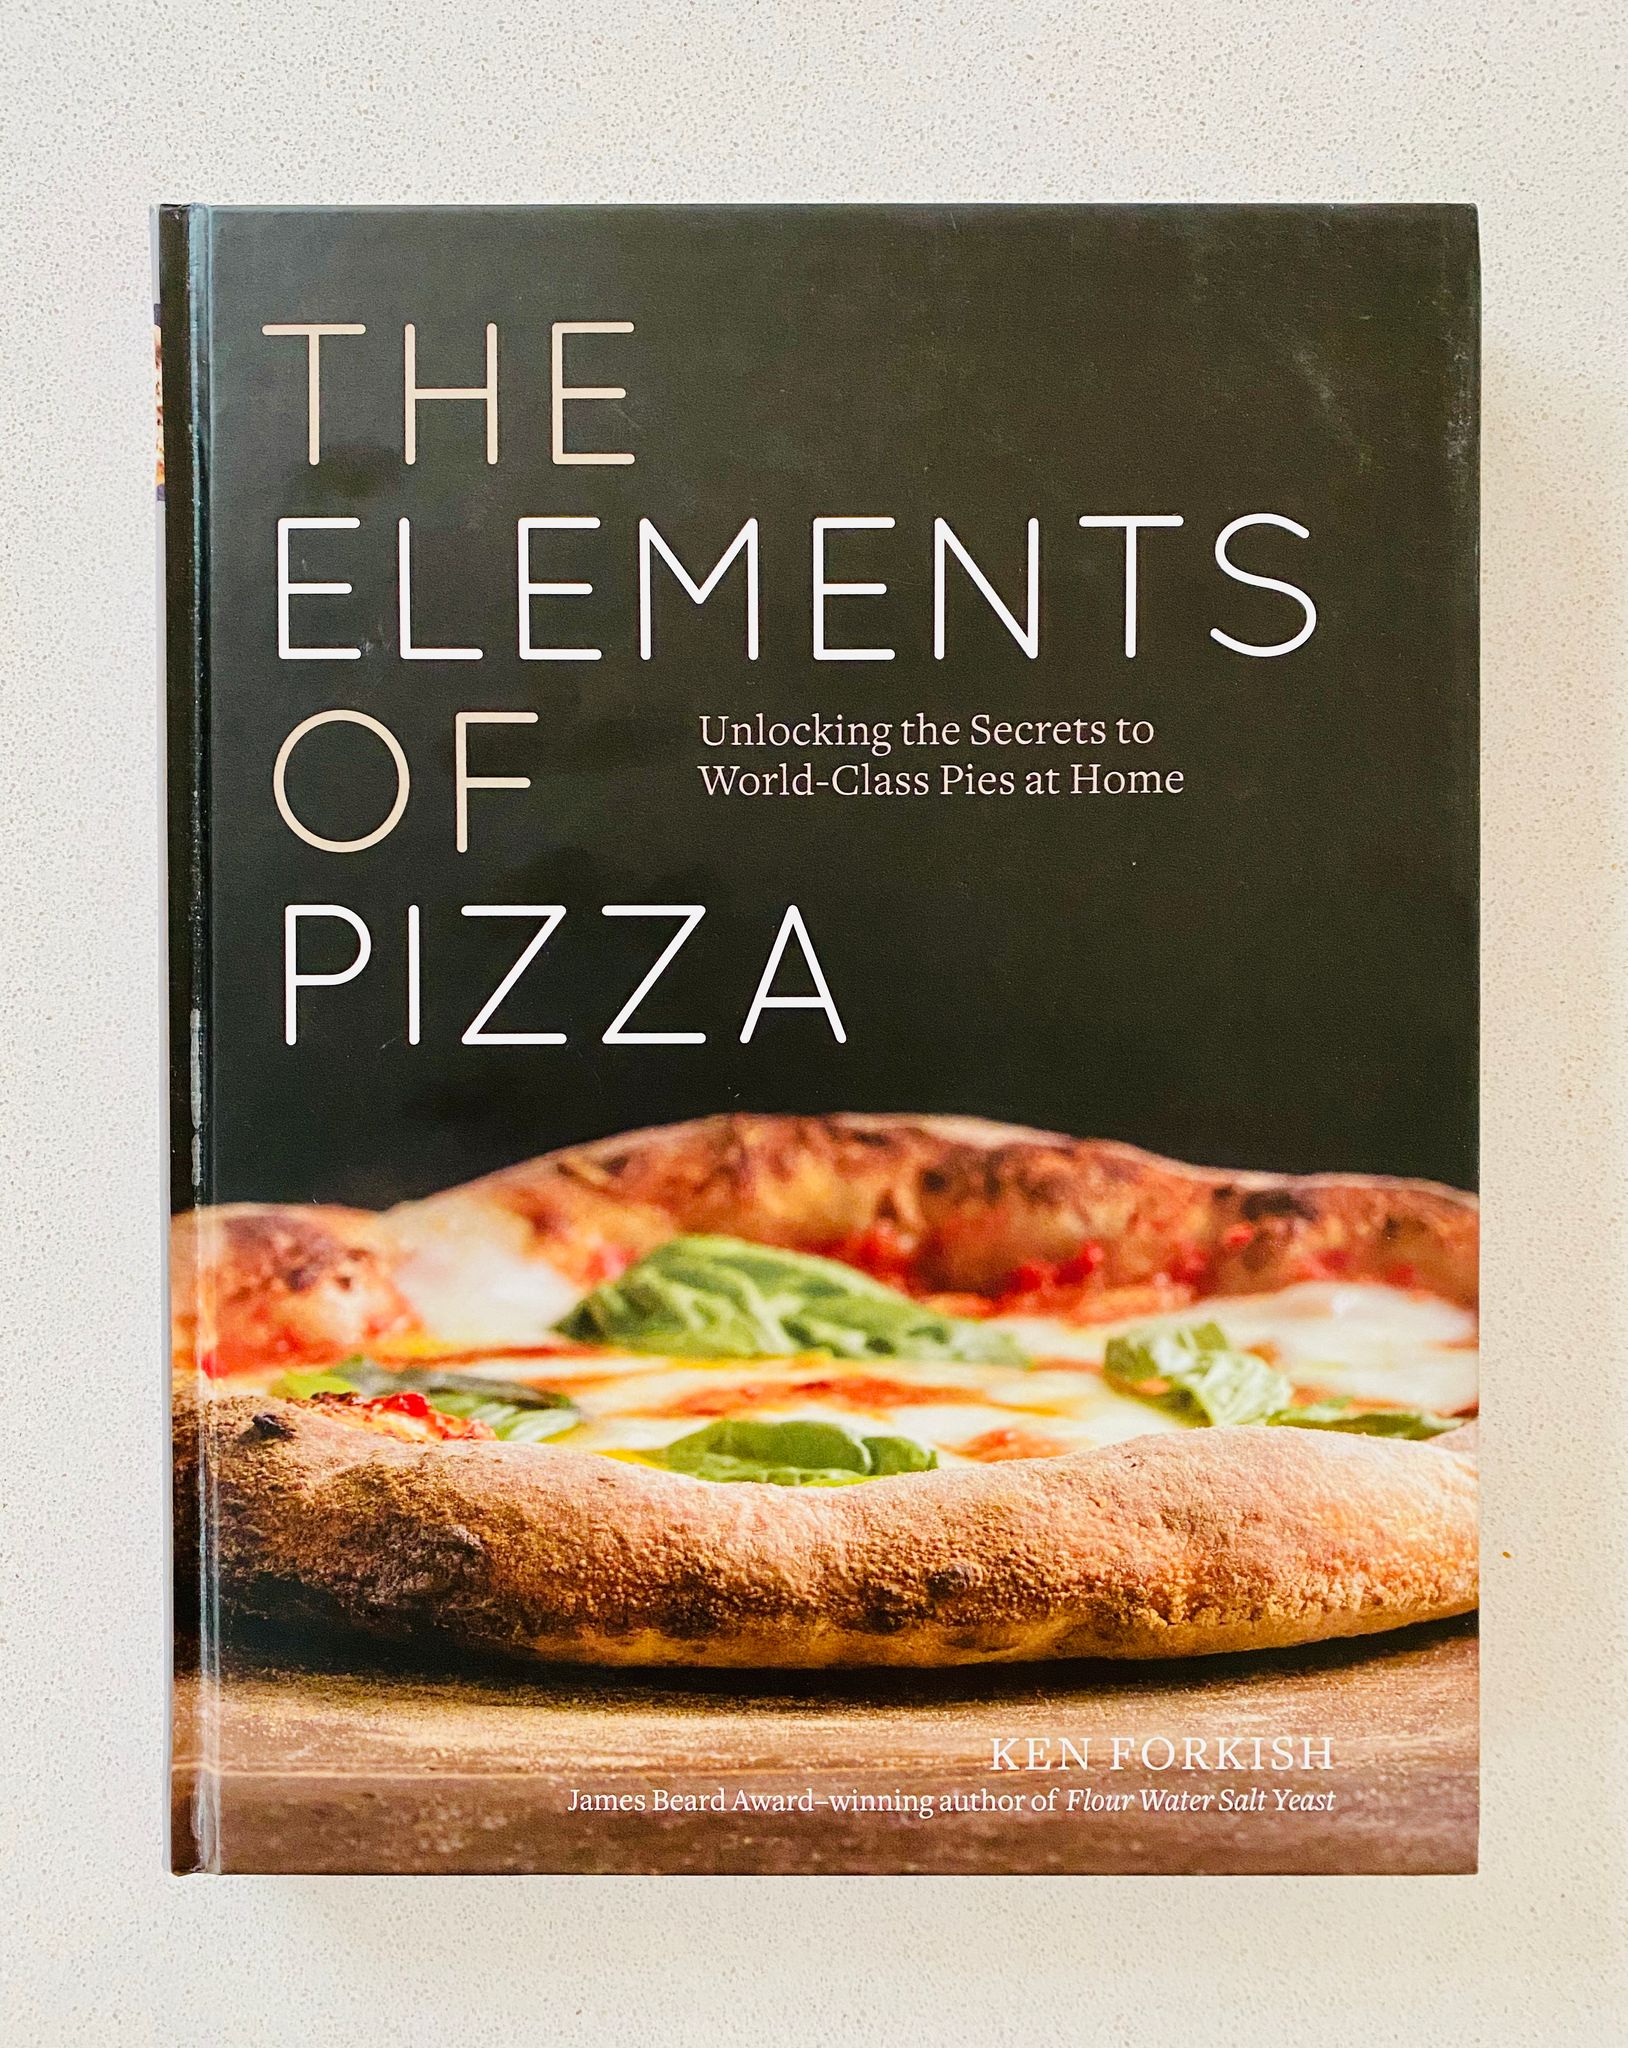 A photo of the cover of a book called "The Elements of Pizza". It has a very arty-looking photo of a delicious-looking pizza on it.